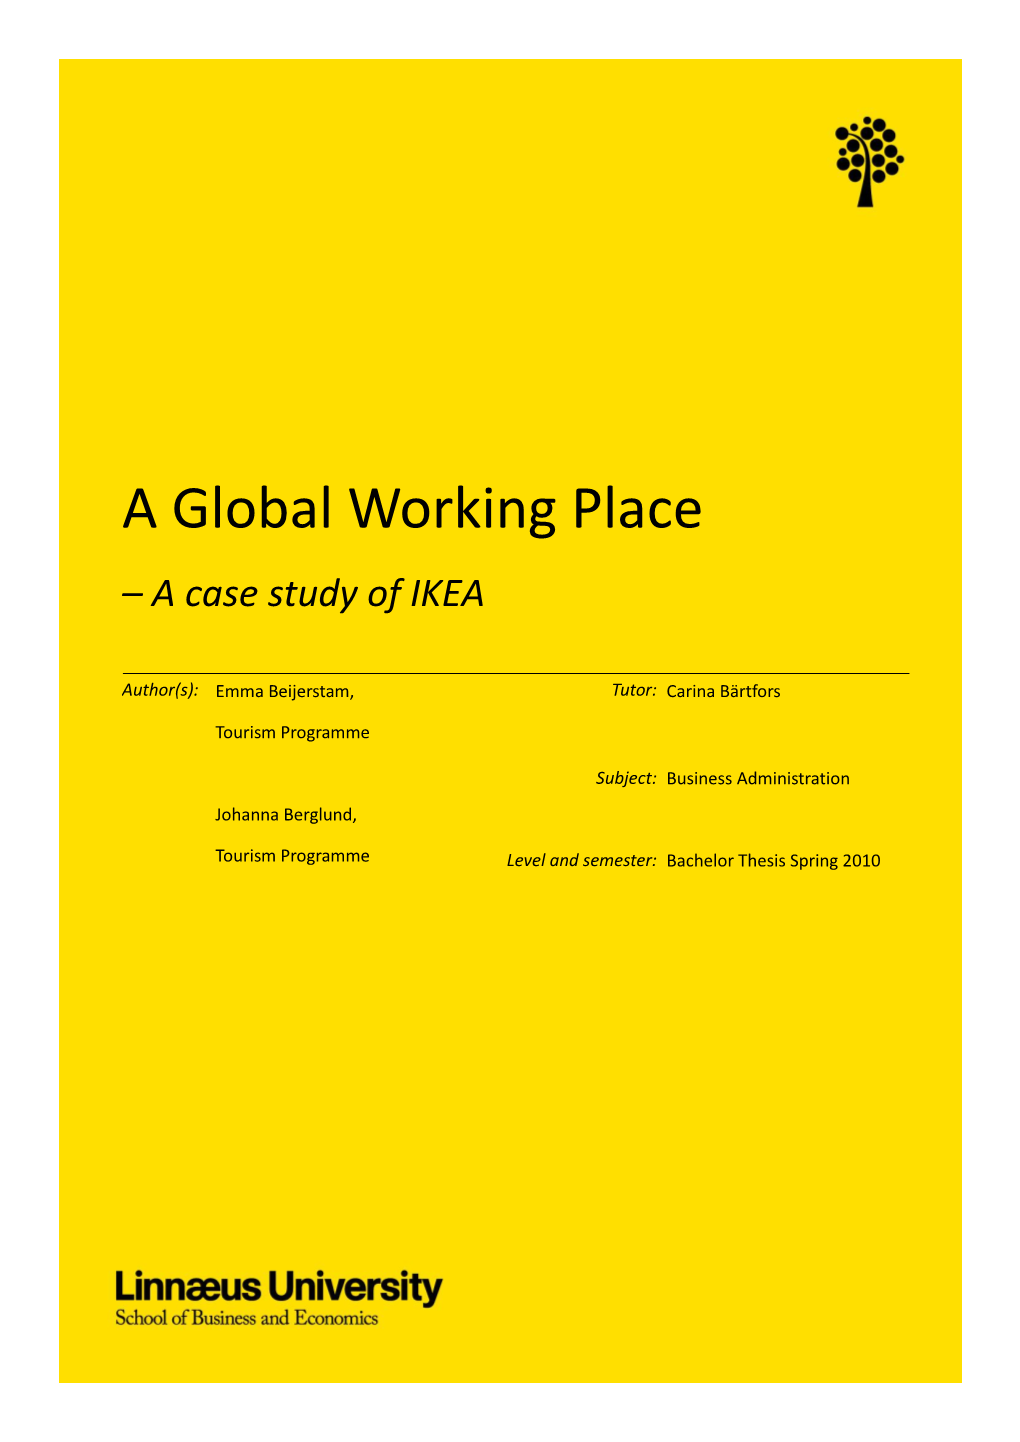 A Global Working Place – a Case Study of IKEA